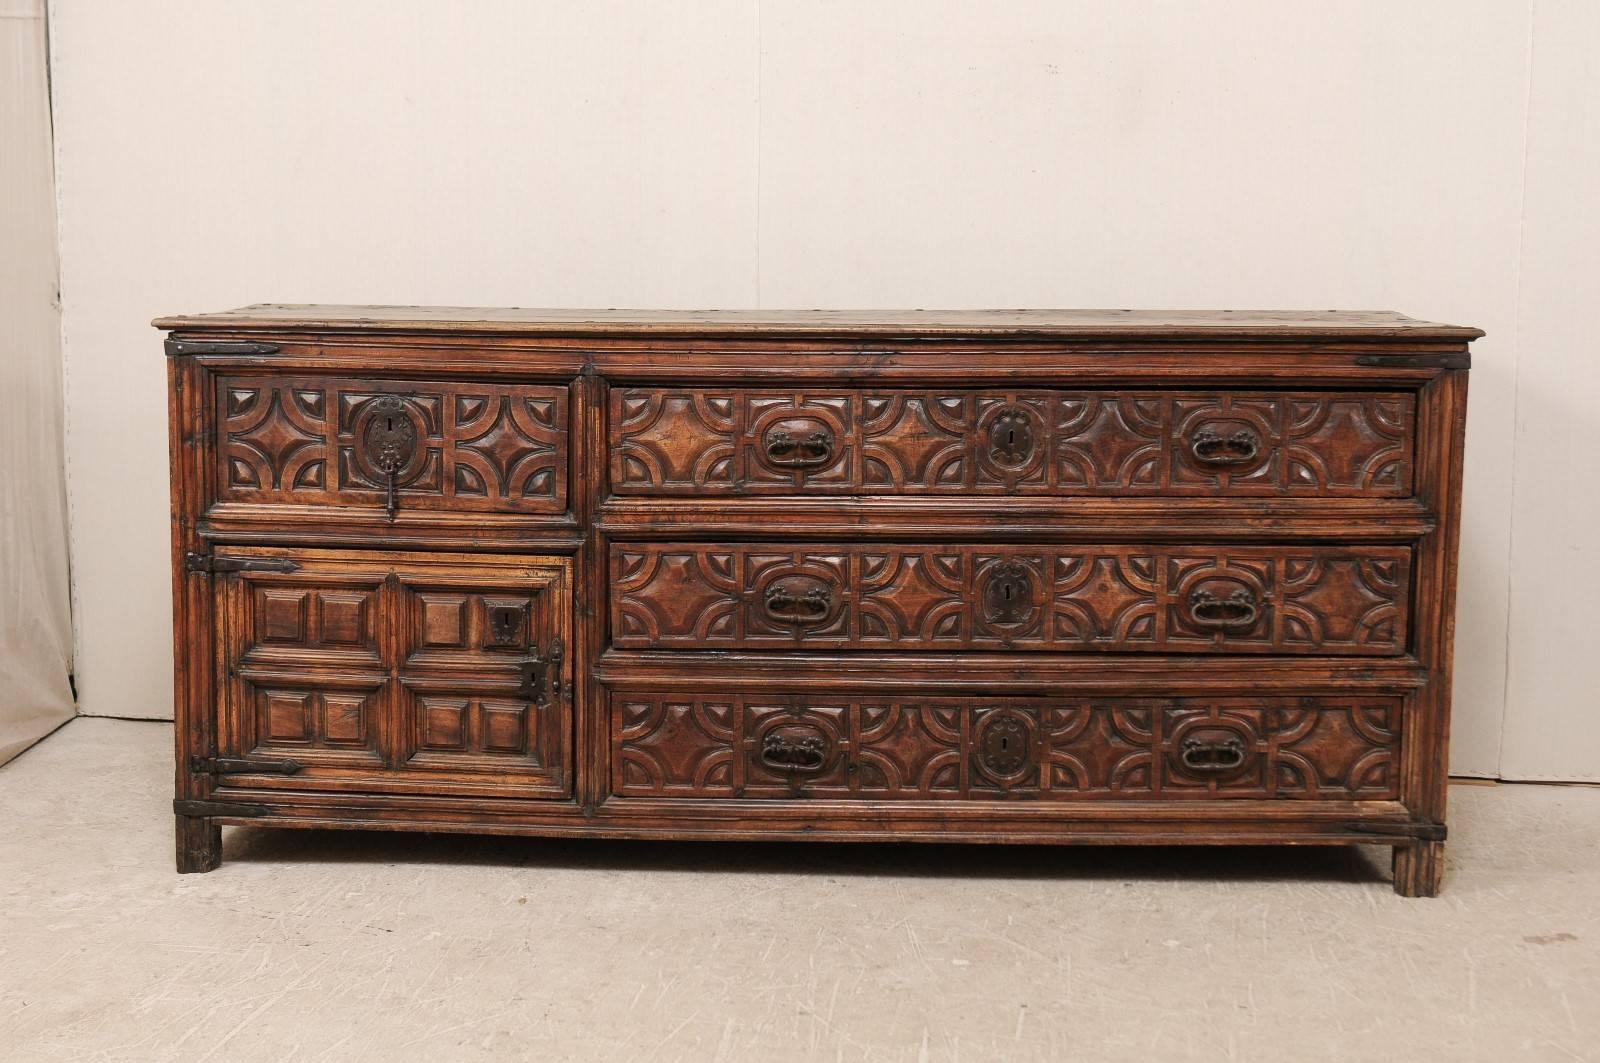 An impressive 18th century Spanish wood carved sacristy chest. This oversized sacristy chest comes from an old church in Spain and dates back to the 18th century, possibly 17th century. This is an exquisite piece with richly carved geometric shapes